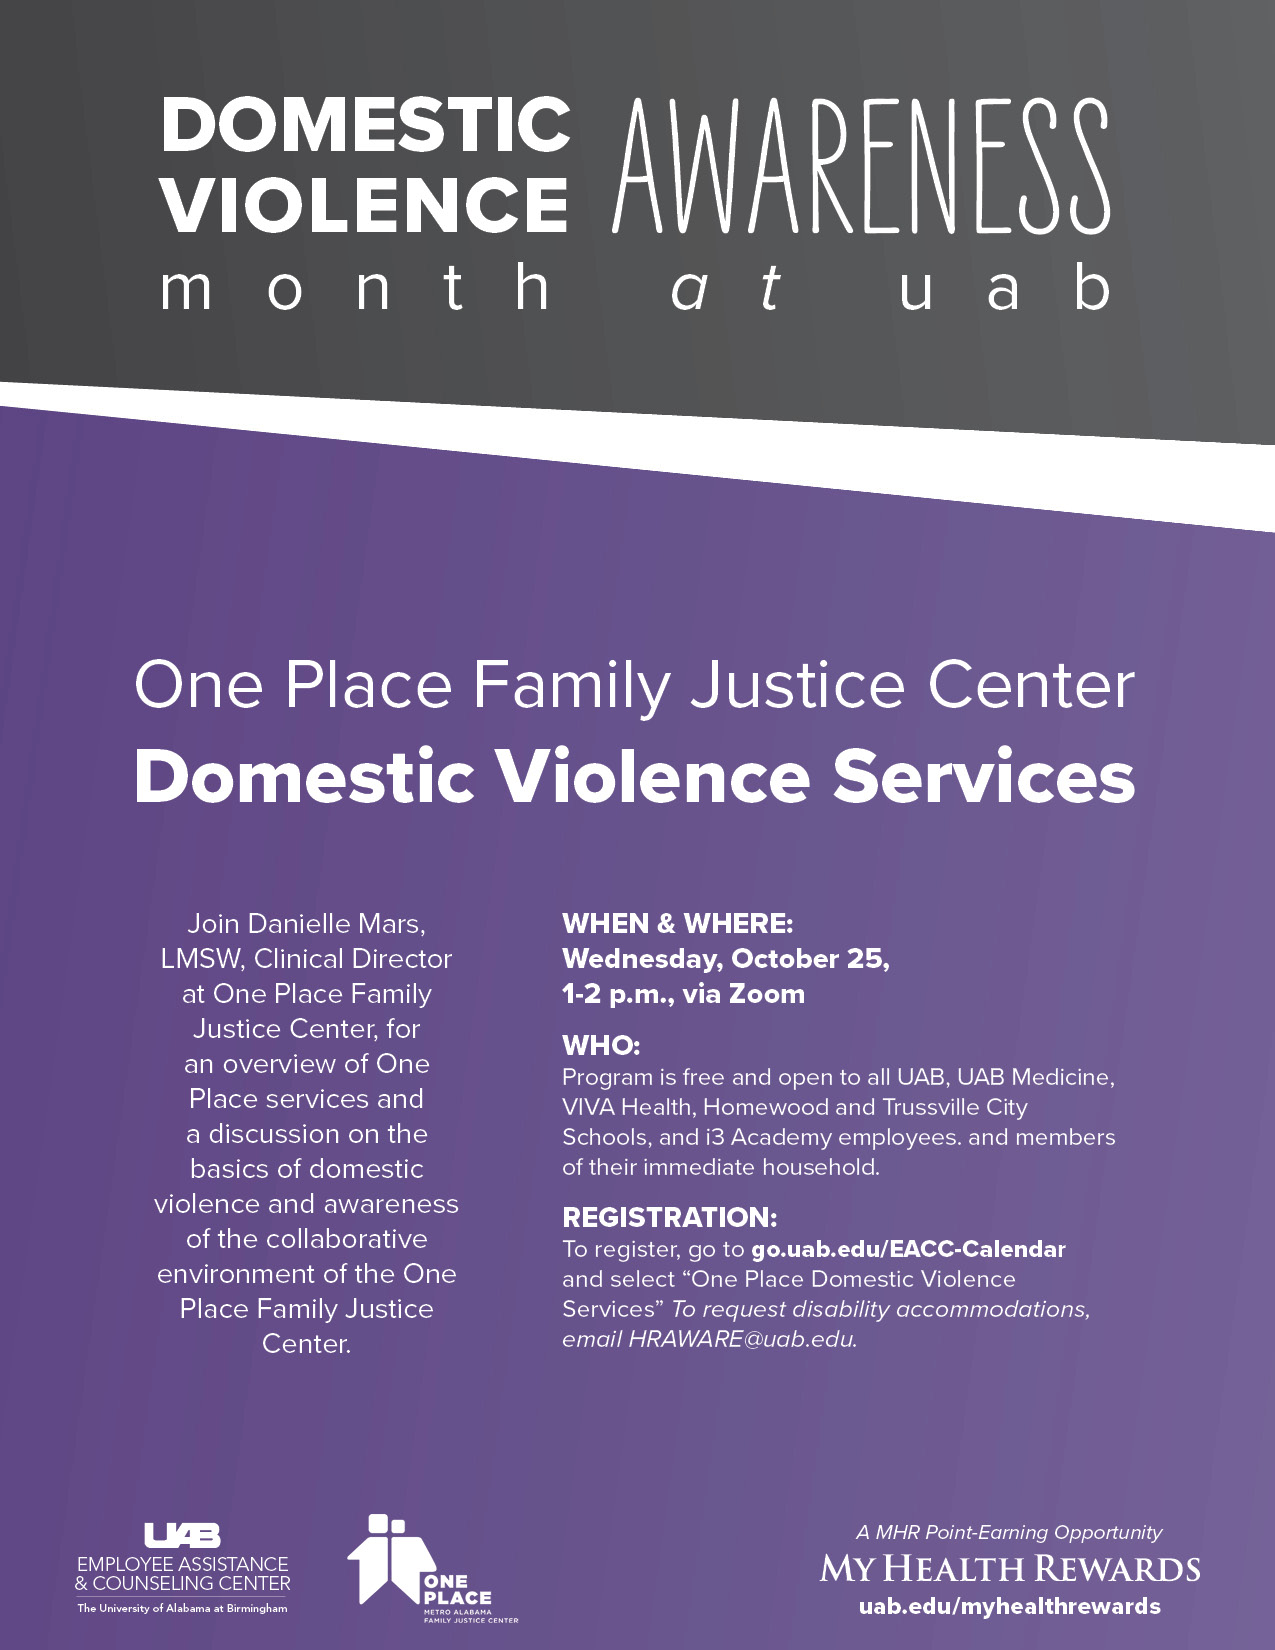 One Place Domestic Violence Services